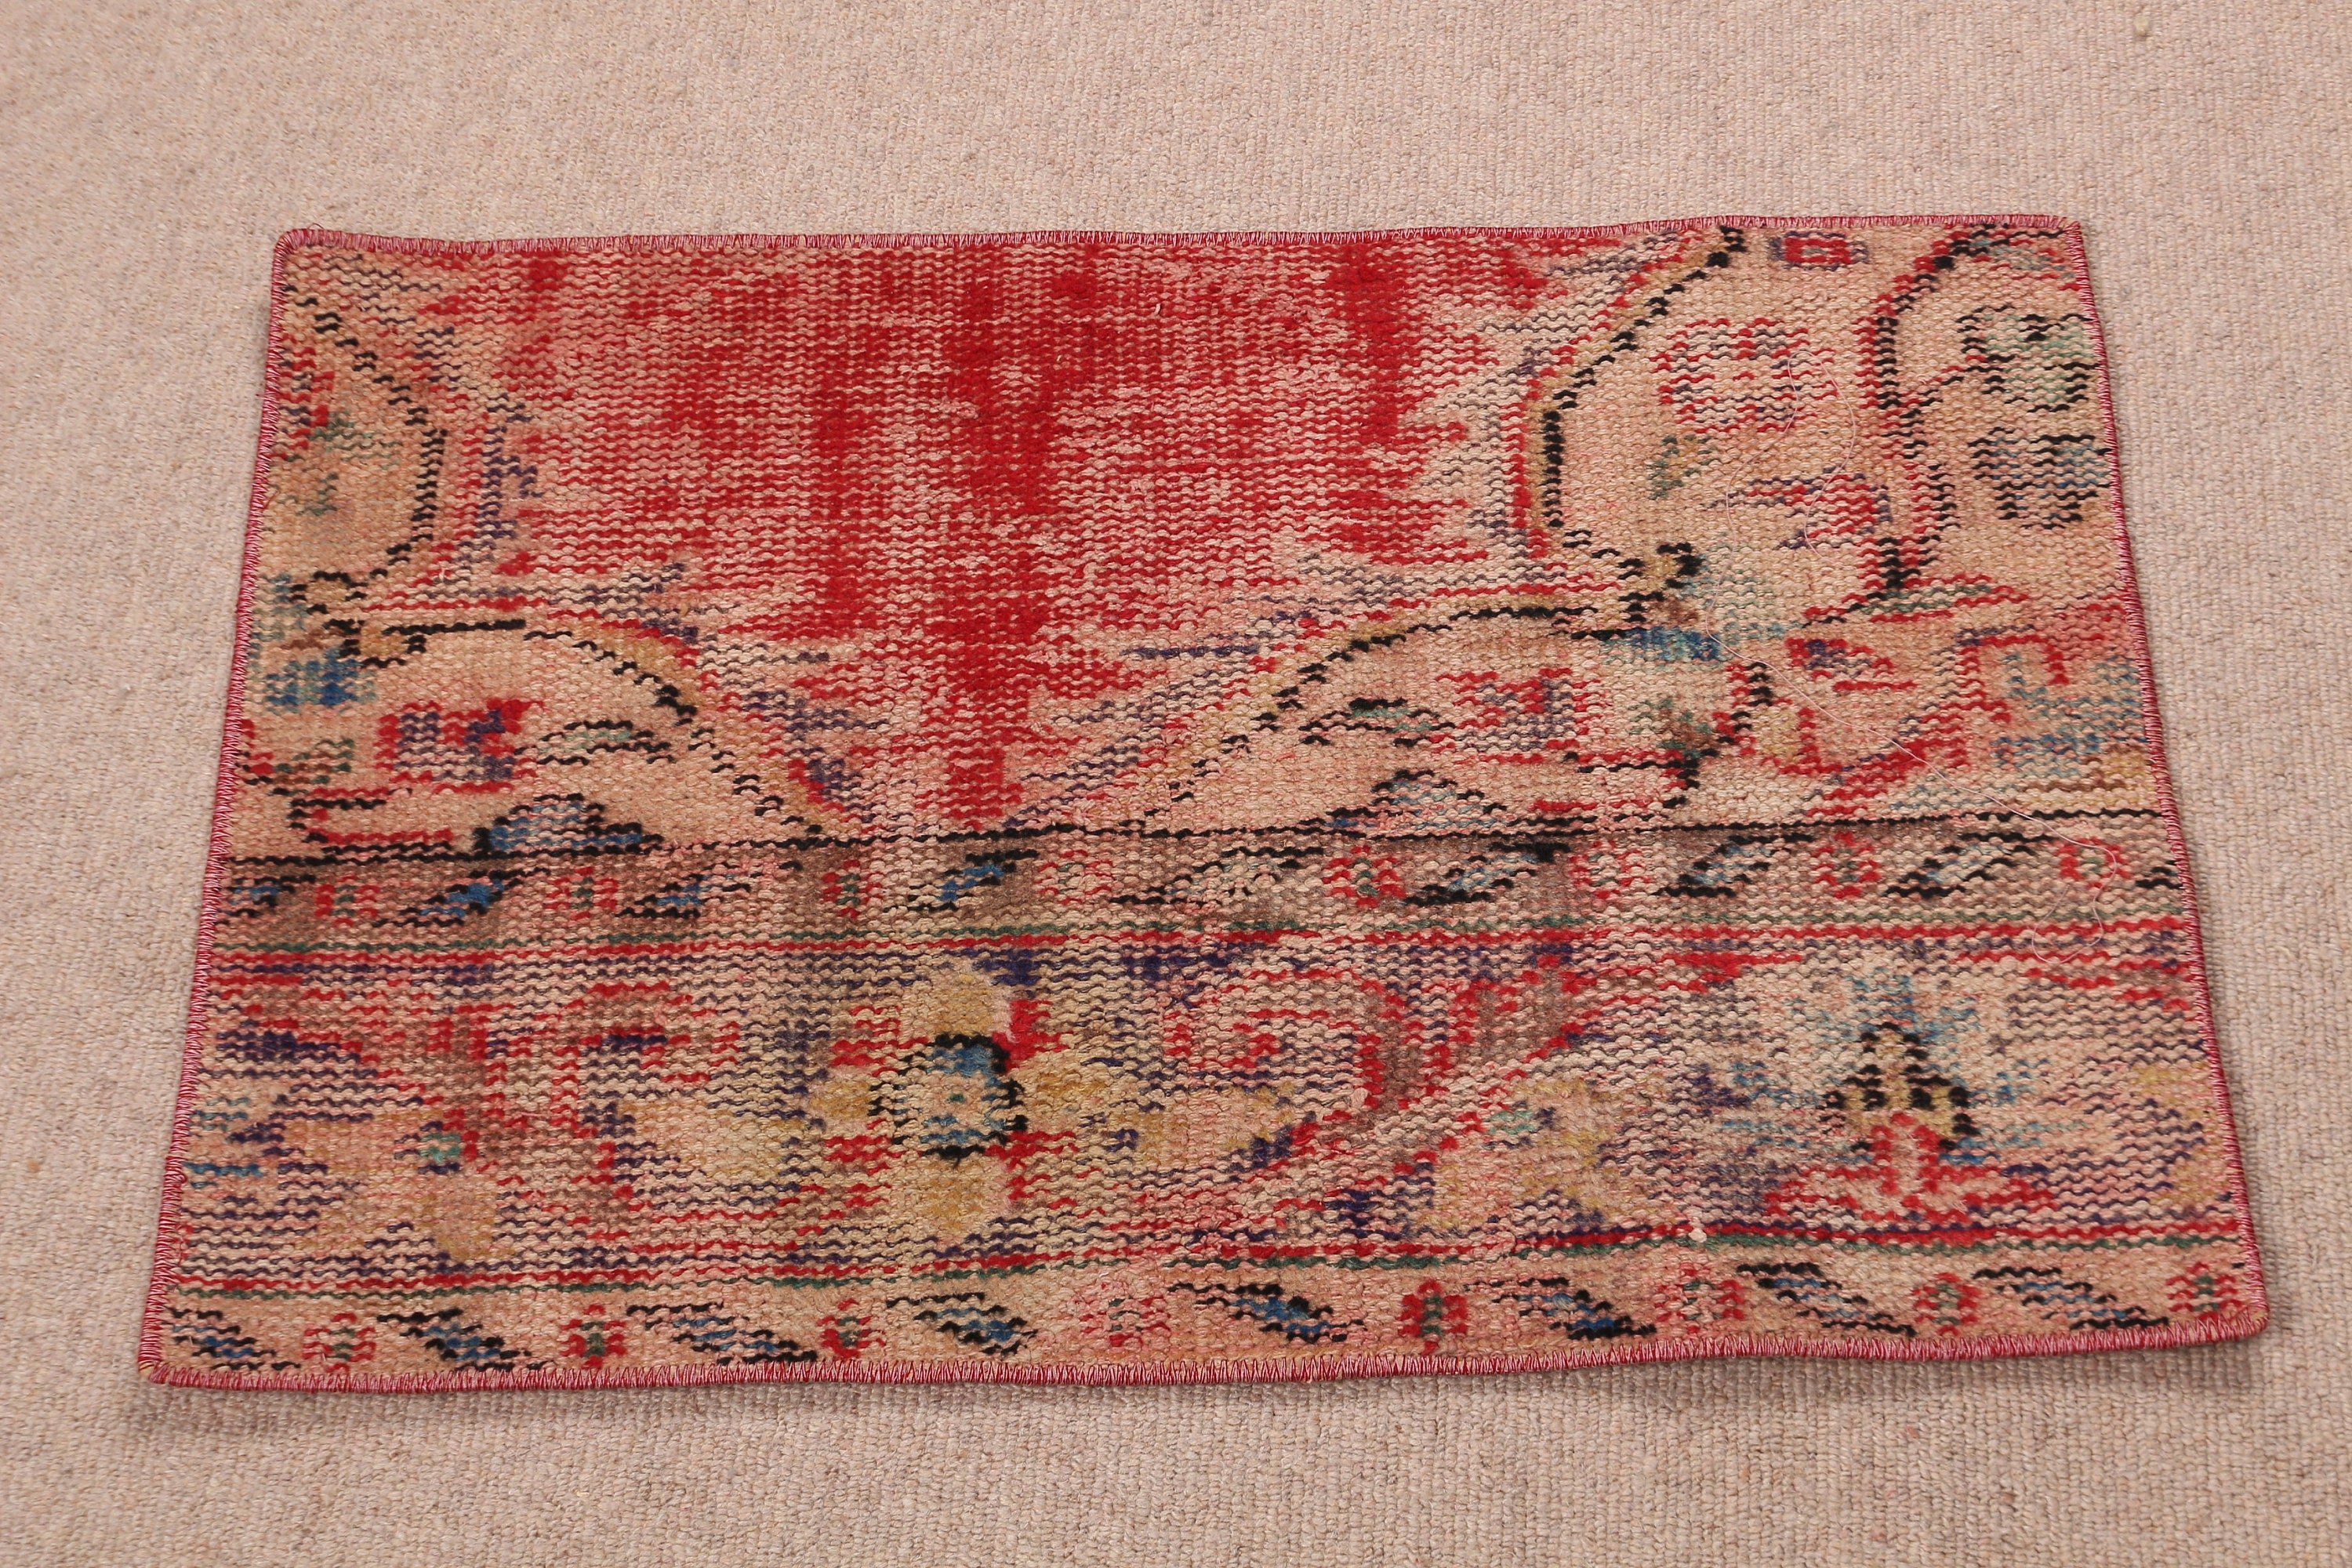 Rugs for Car Mat, Bathroom Rug, Turkish Rugs, Vintage Rug, Oushak Rug, Natural Rugs, Anatolian Rug, Red  1.6x2.4 ft Small Rug